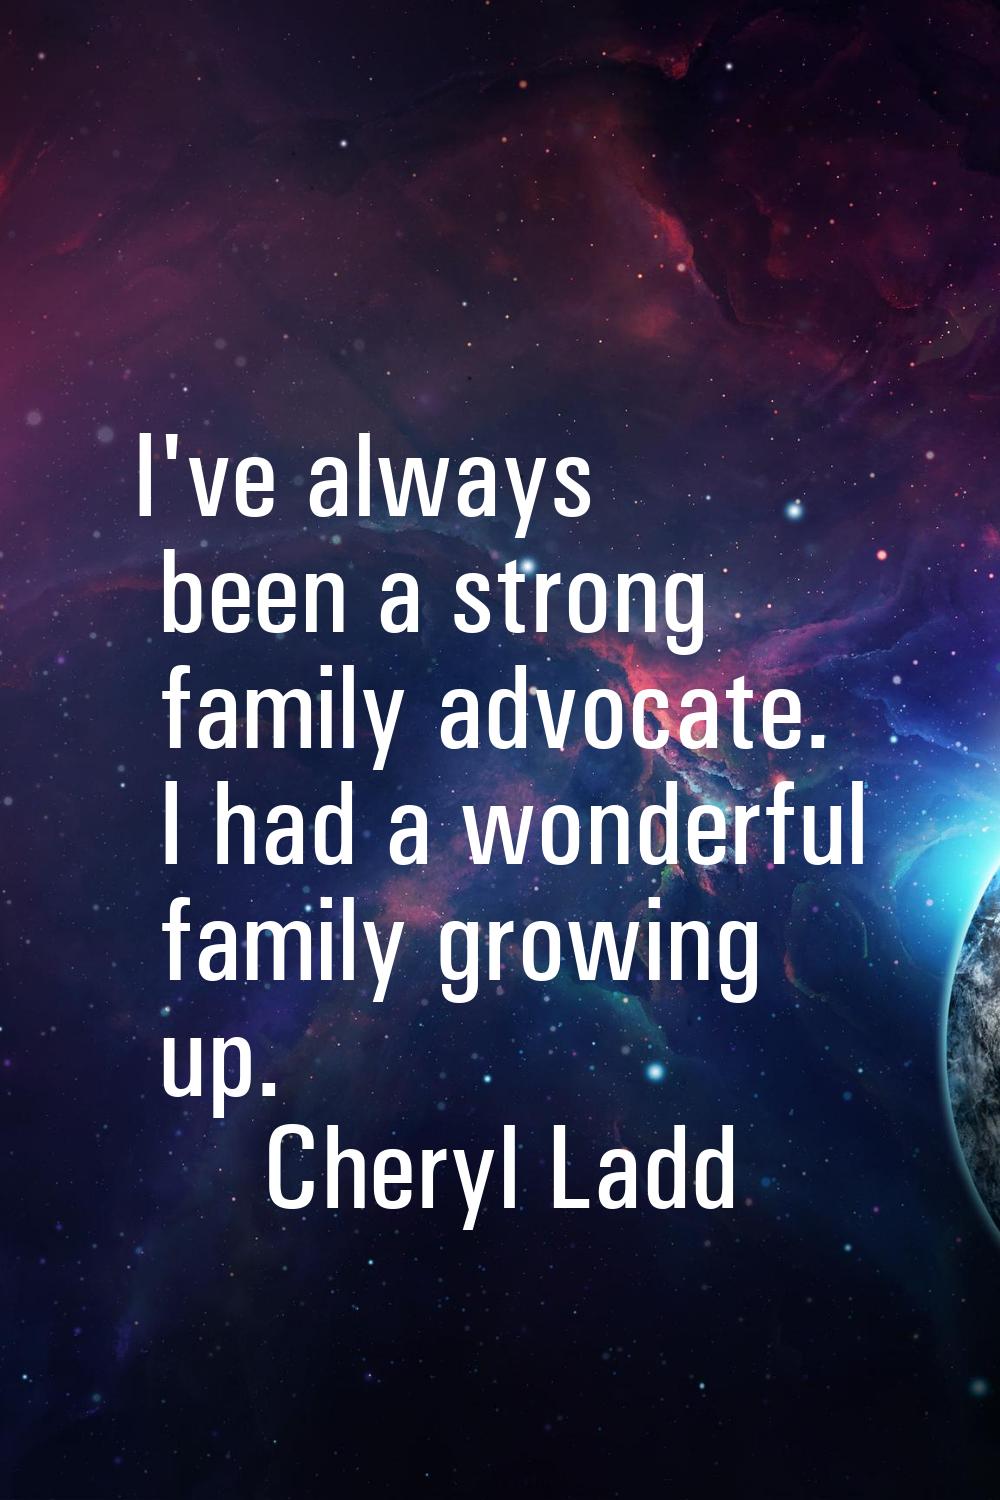 I've always been a strong family advocate. I had a wonderful family growing up.